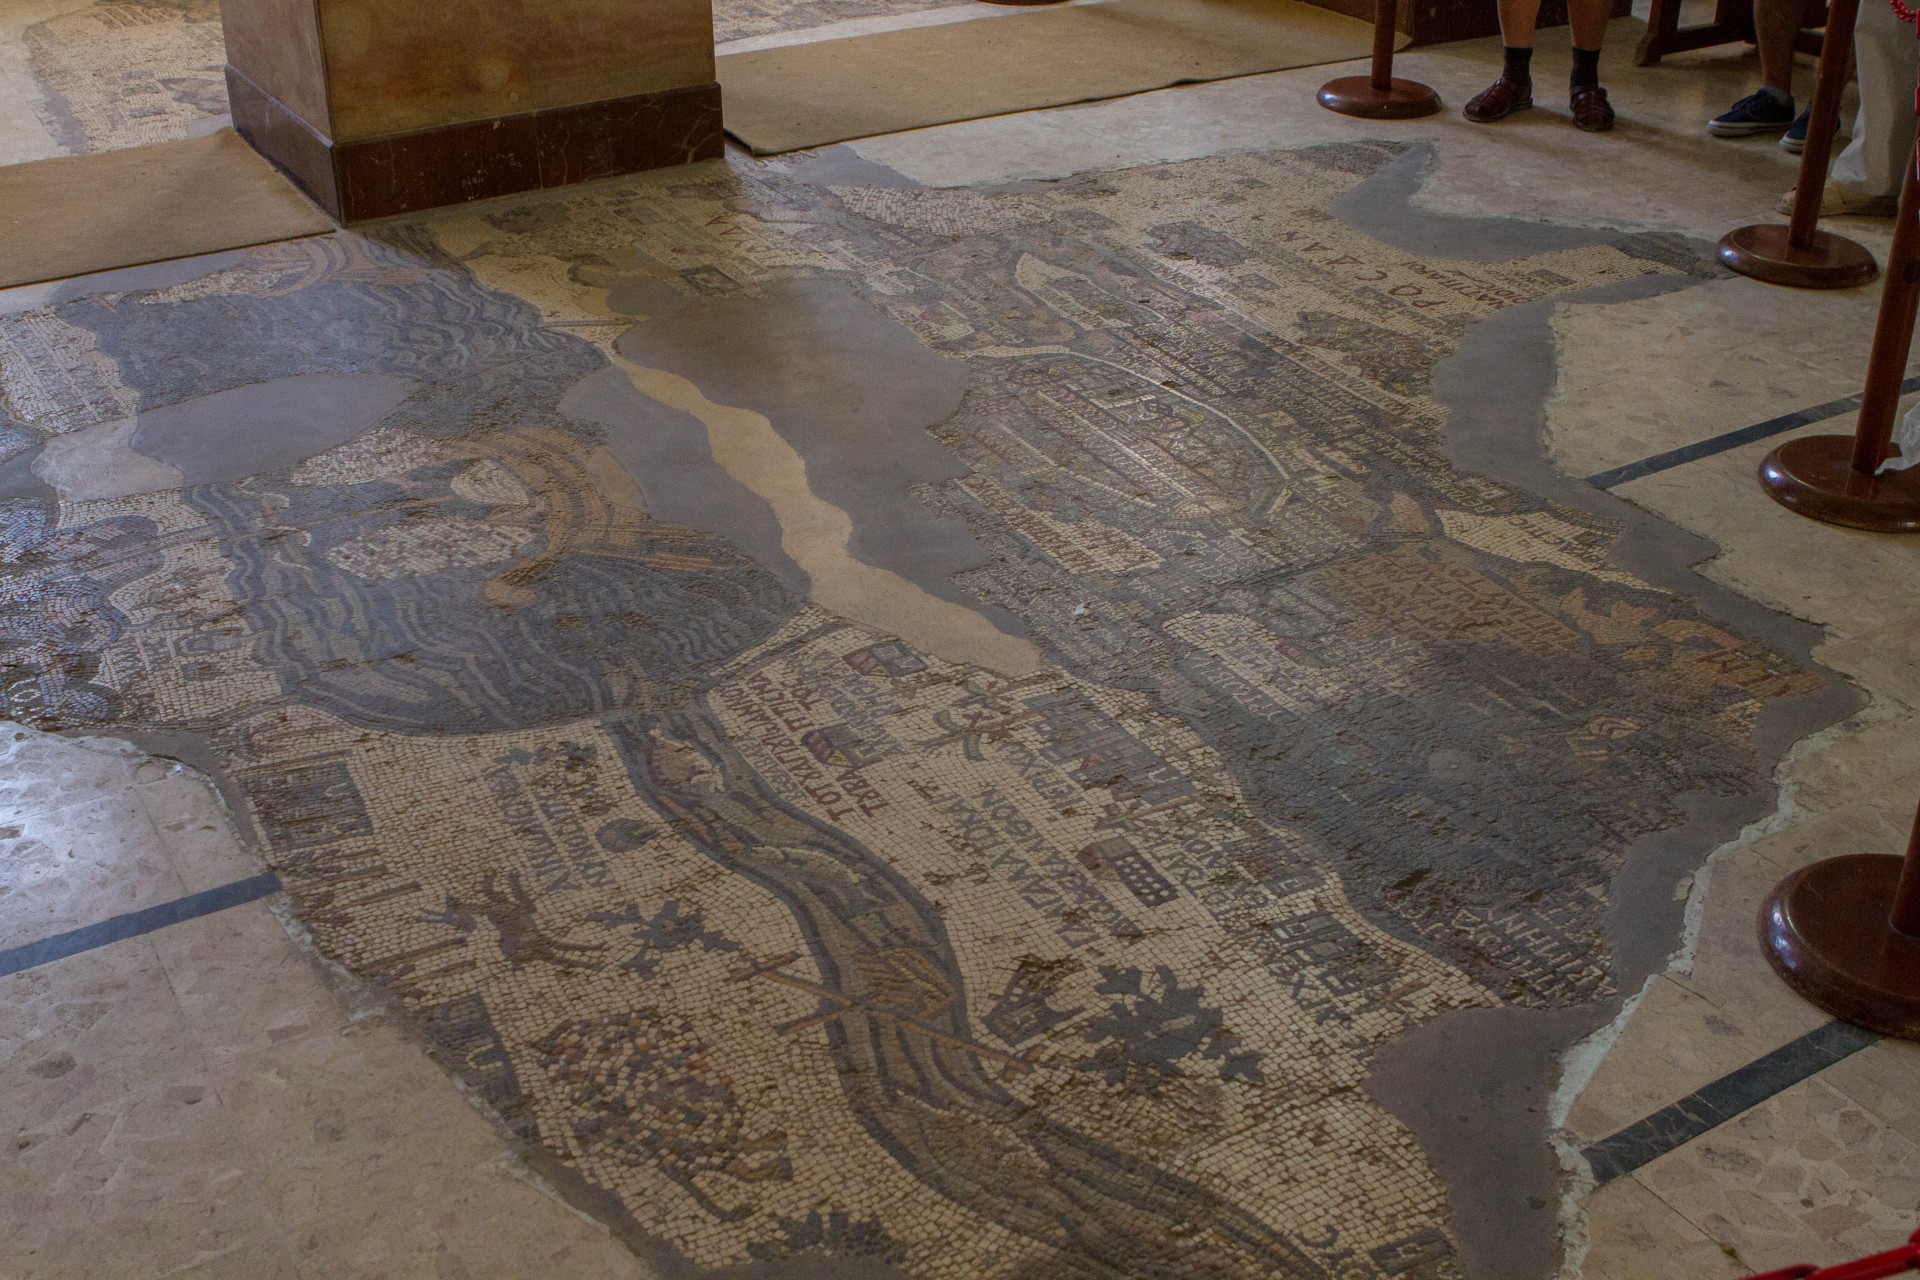 Ancient map of the holy land on a church floor